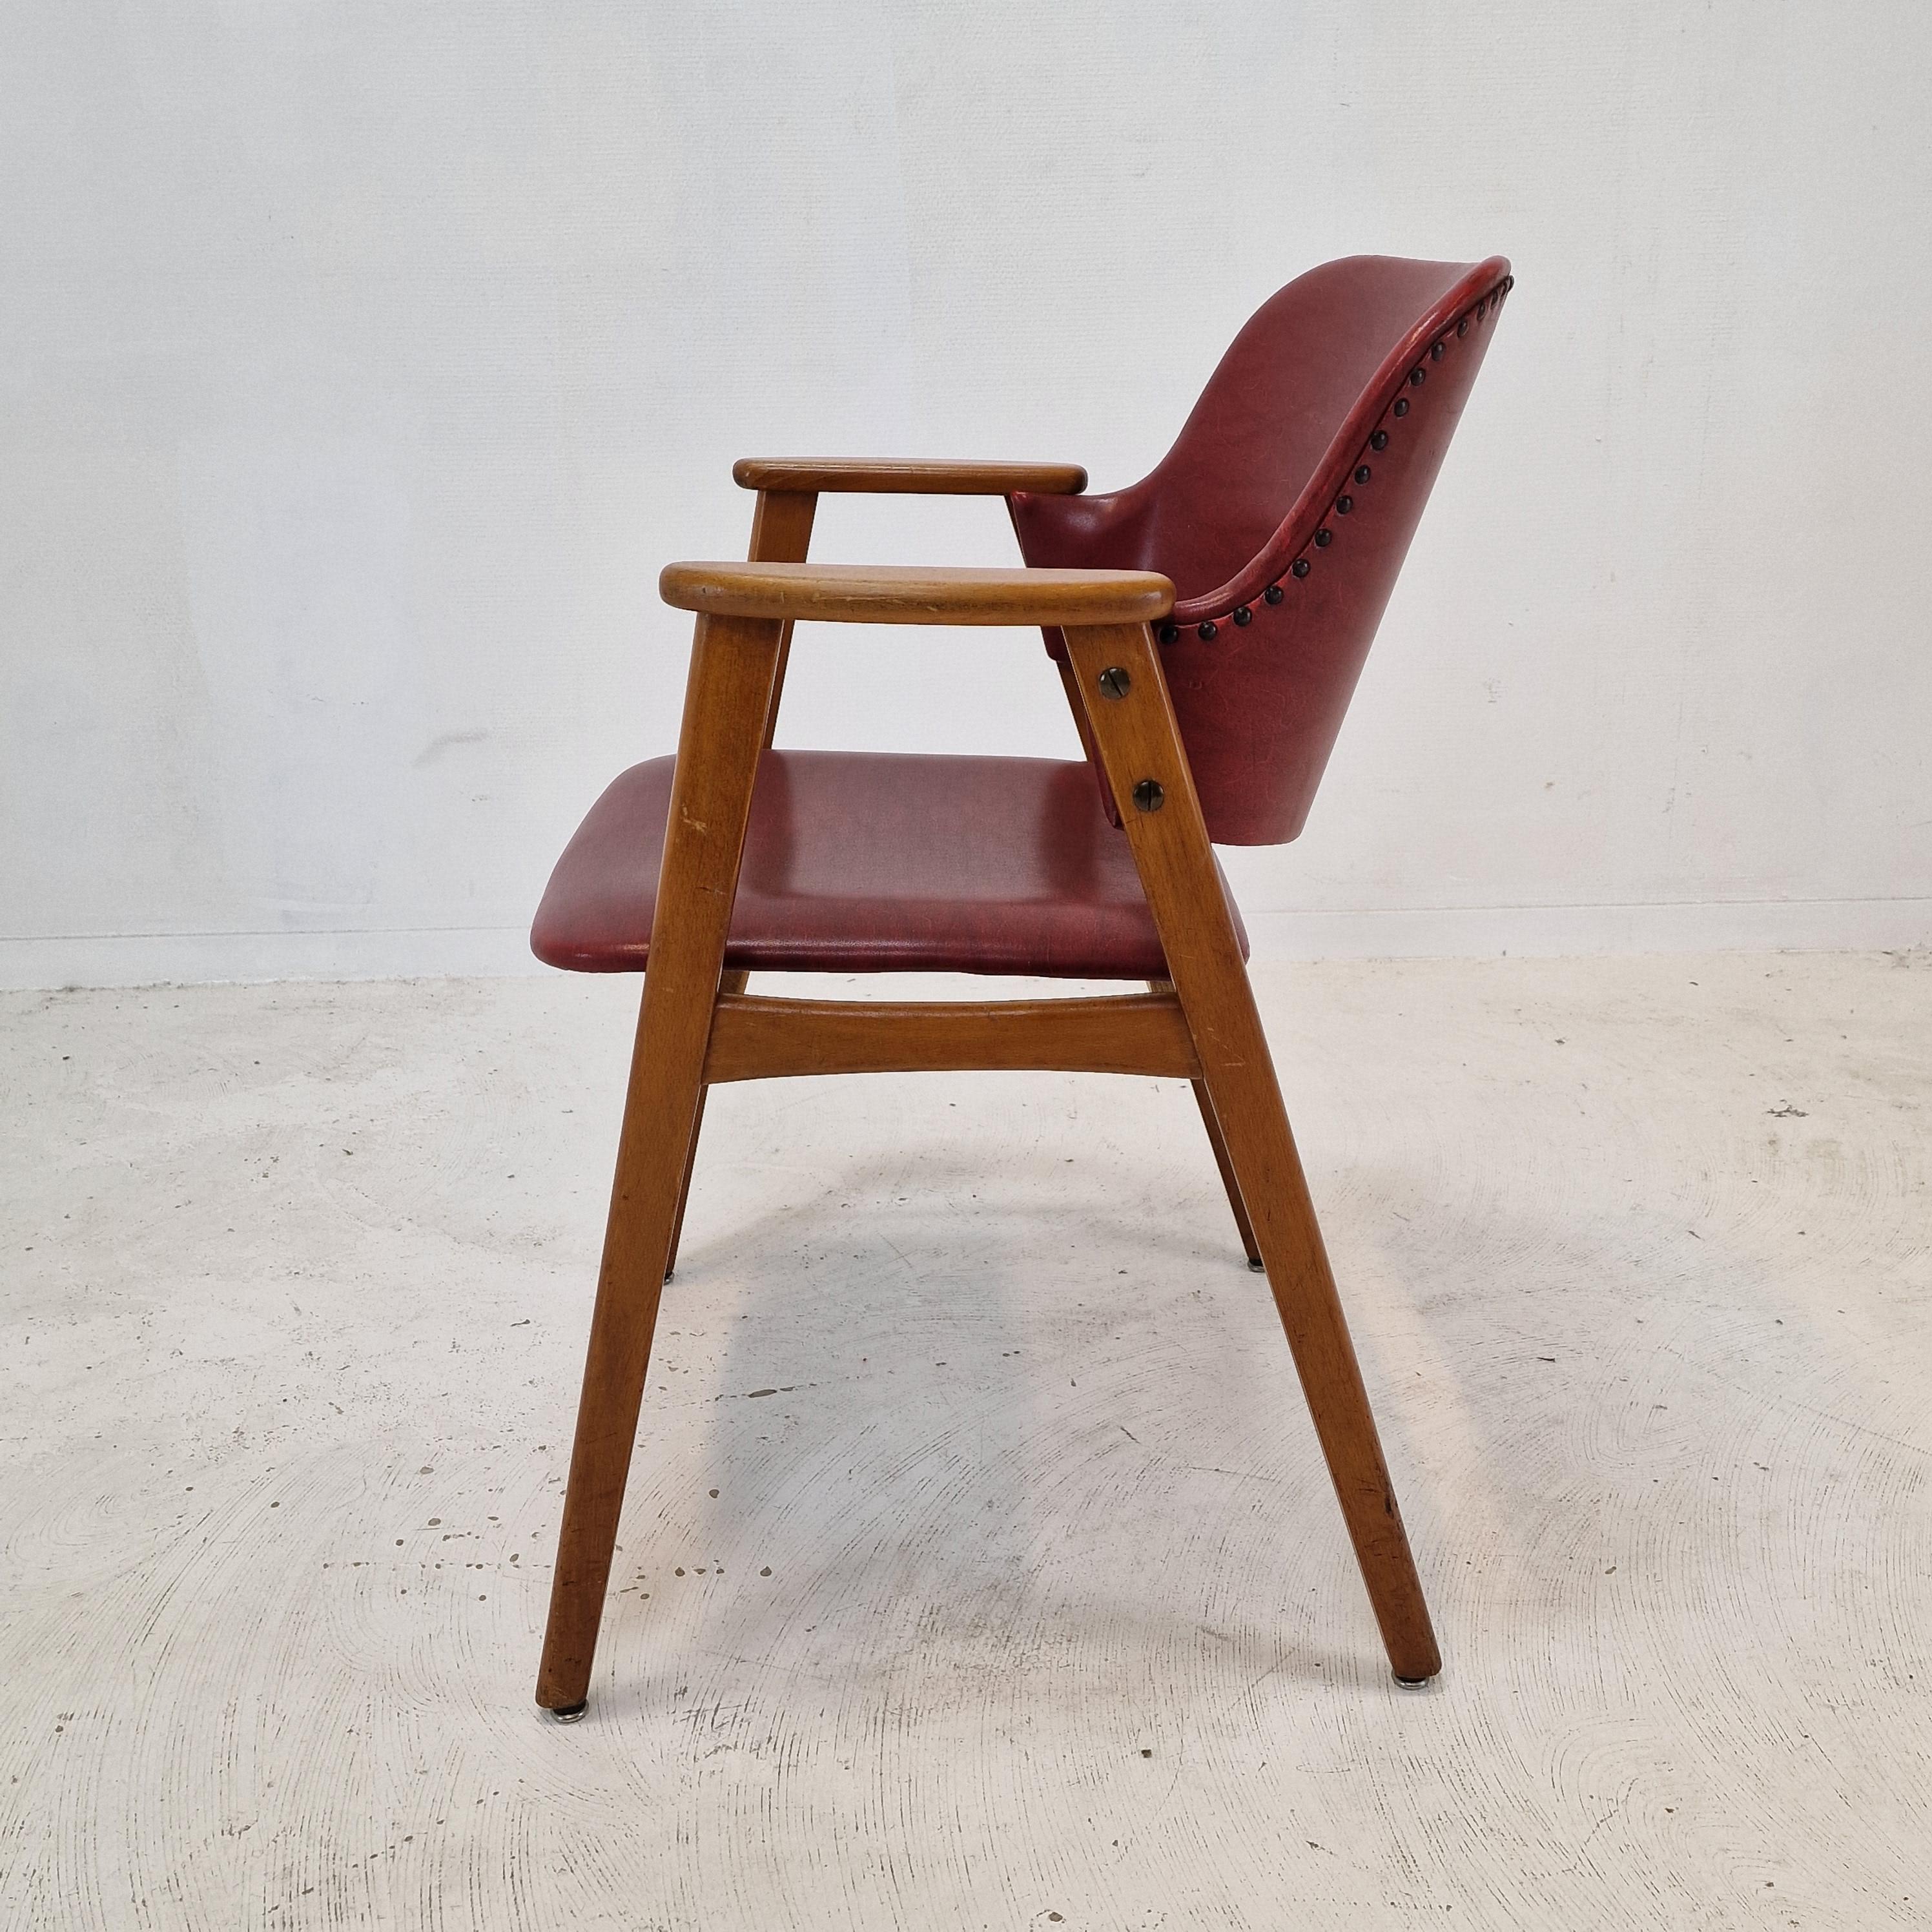 Faux Leather Midcentury Dining or Restaurant Chairs by Cees Braakman for Pastoe, 1950s For Sale